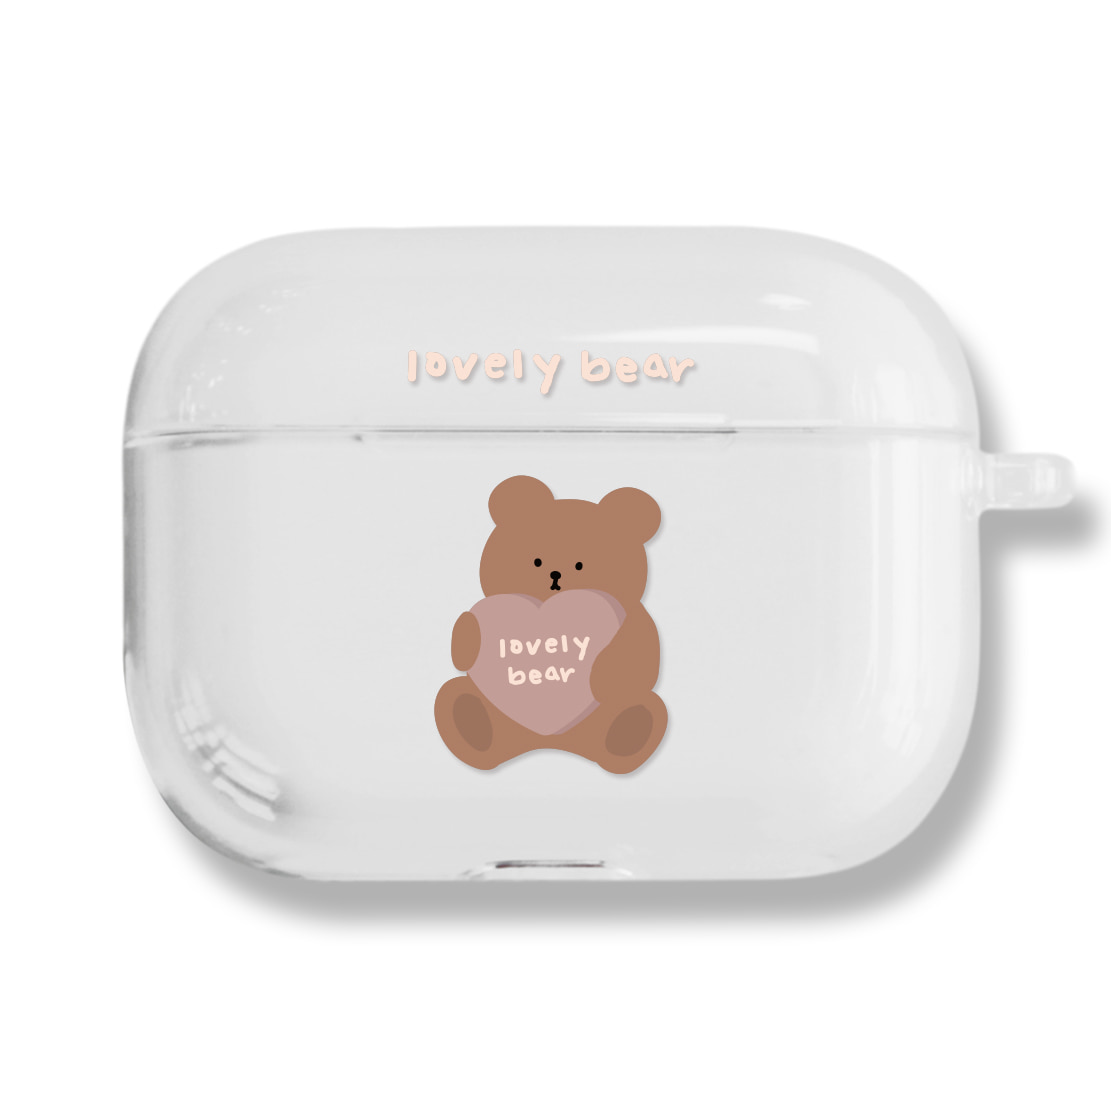 [CLEAR AIRPODS PRO] 596 Teddy베어(핑크)